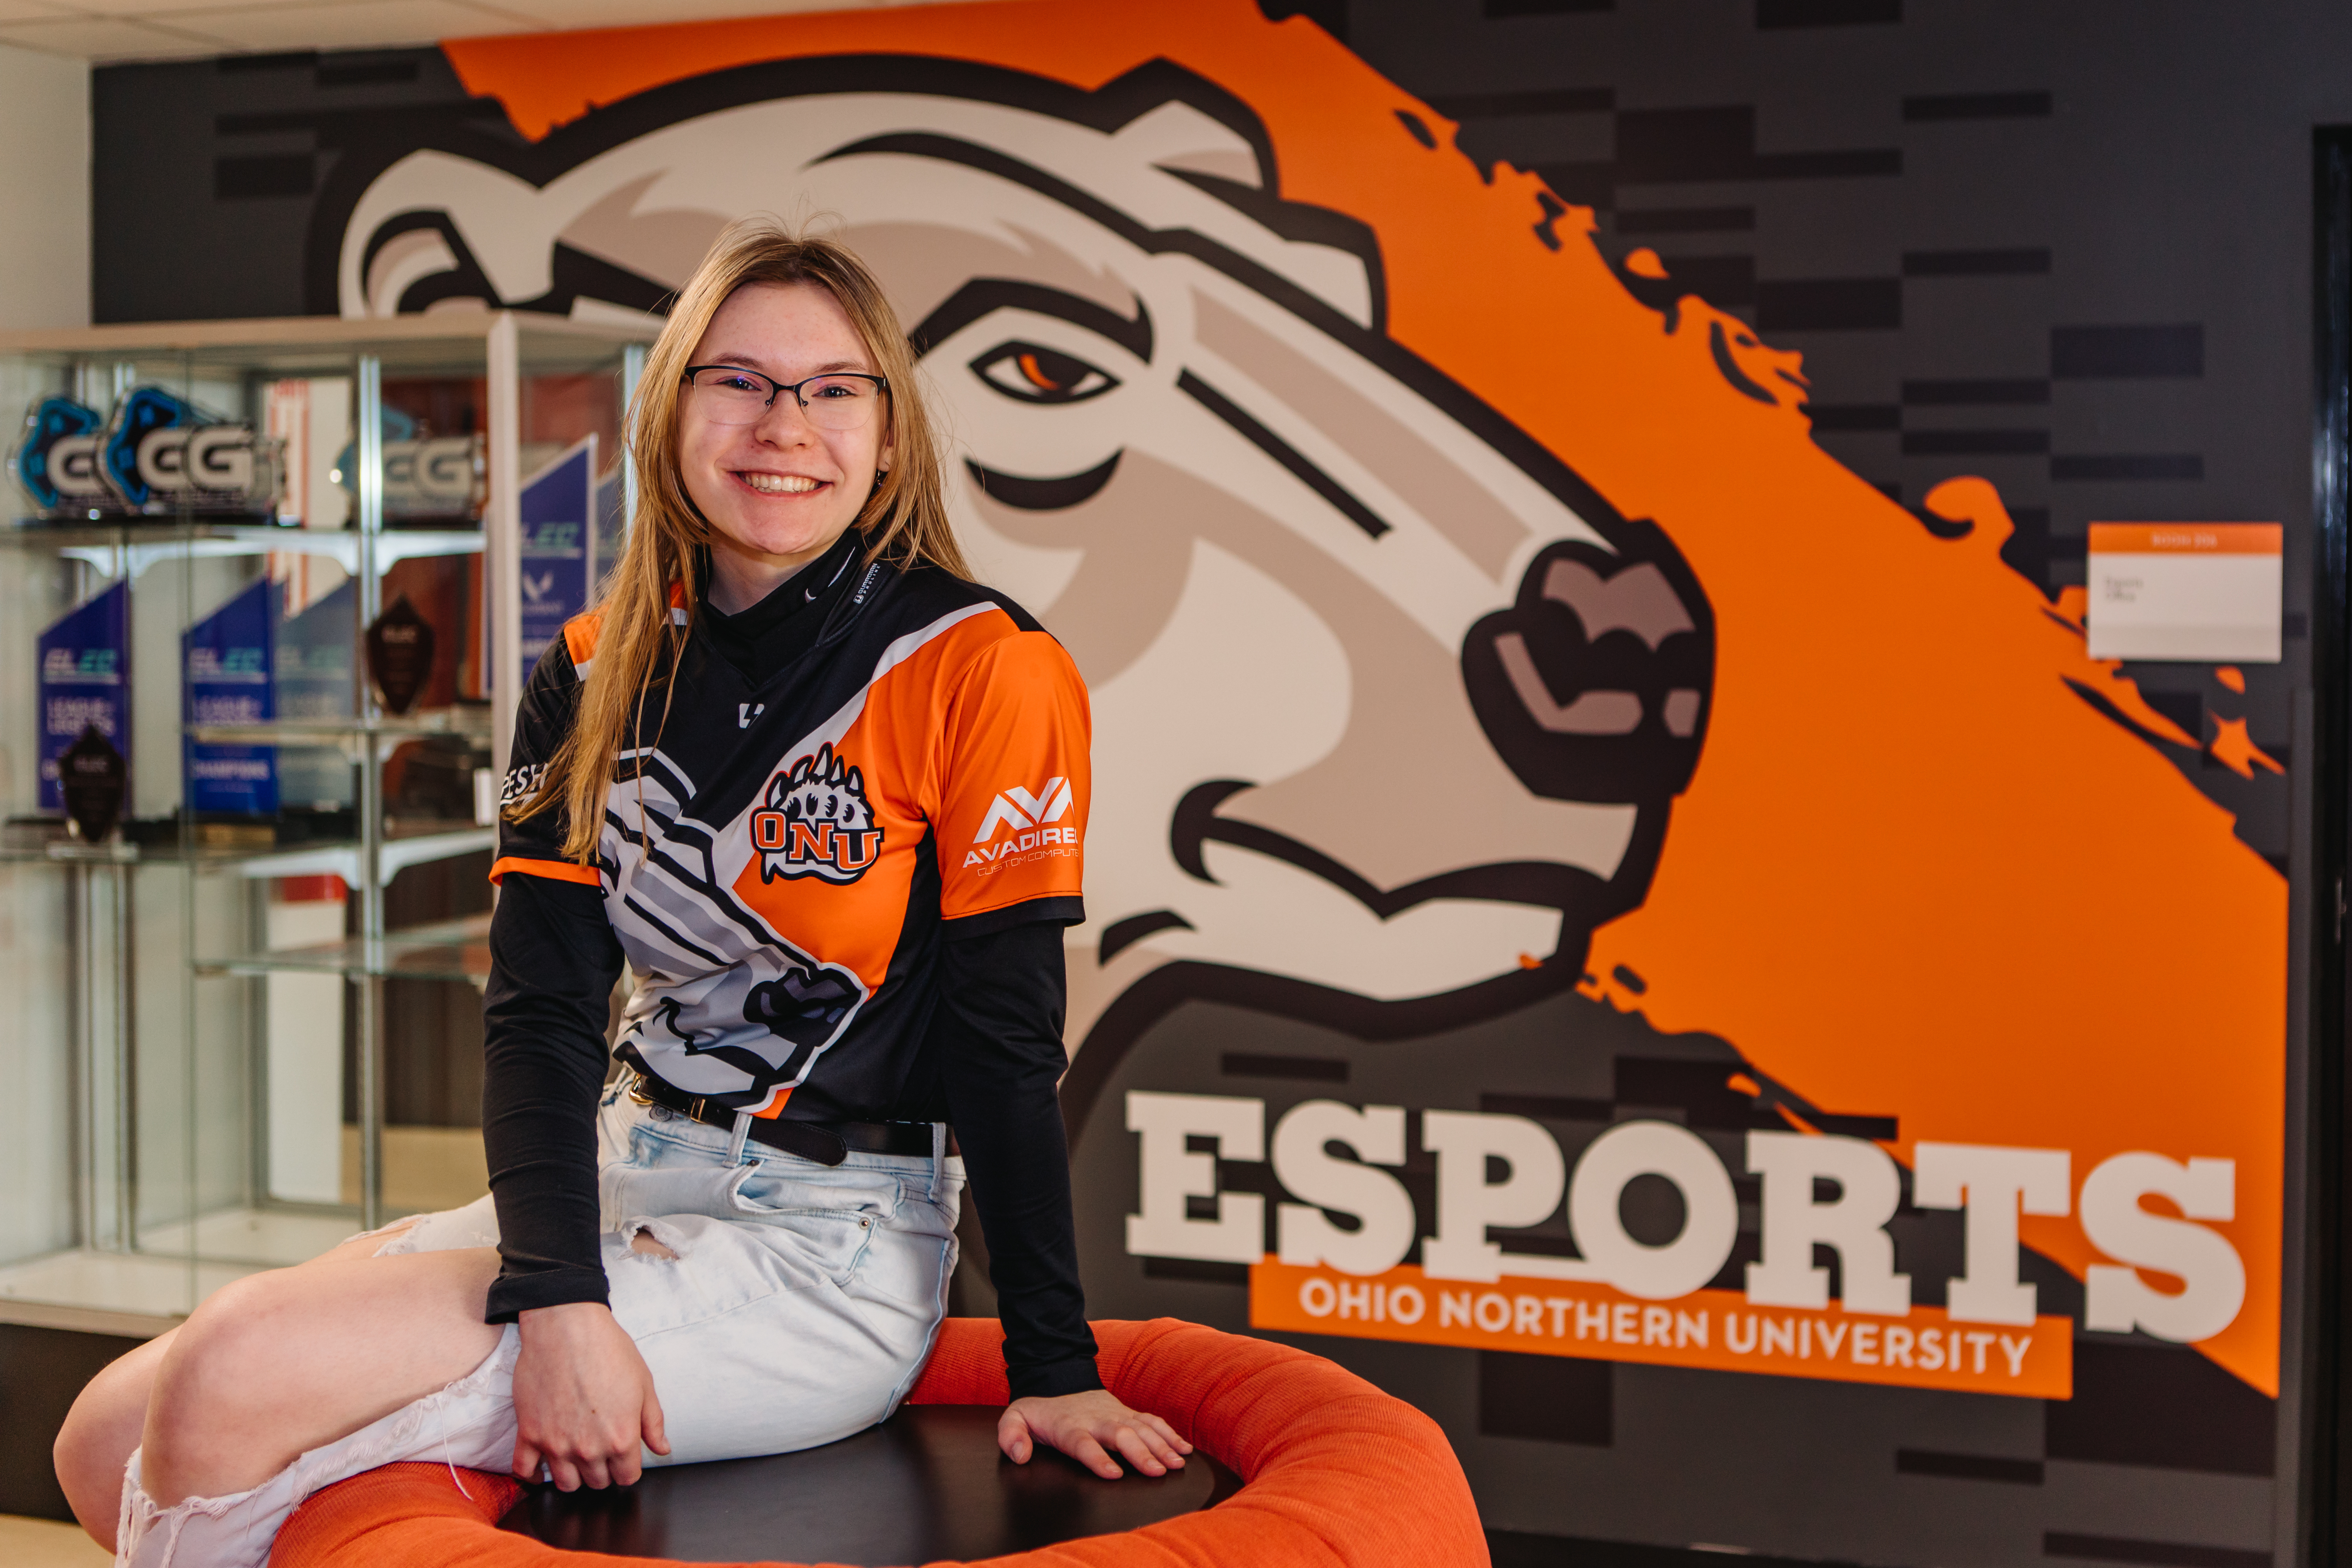 Photo of Maria in front of ESports signage